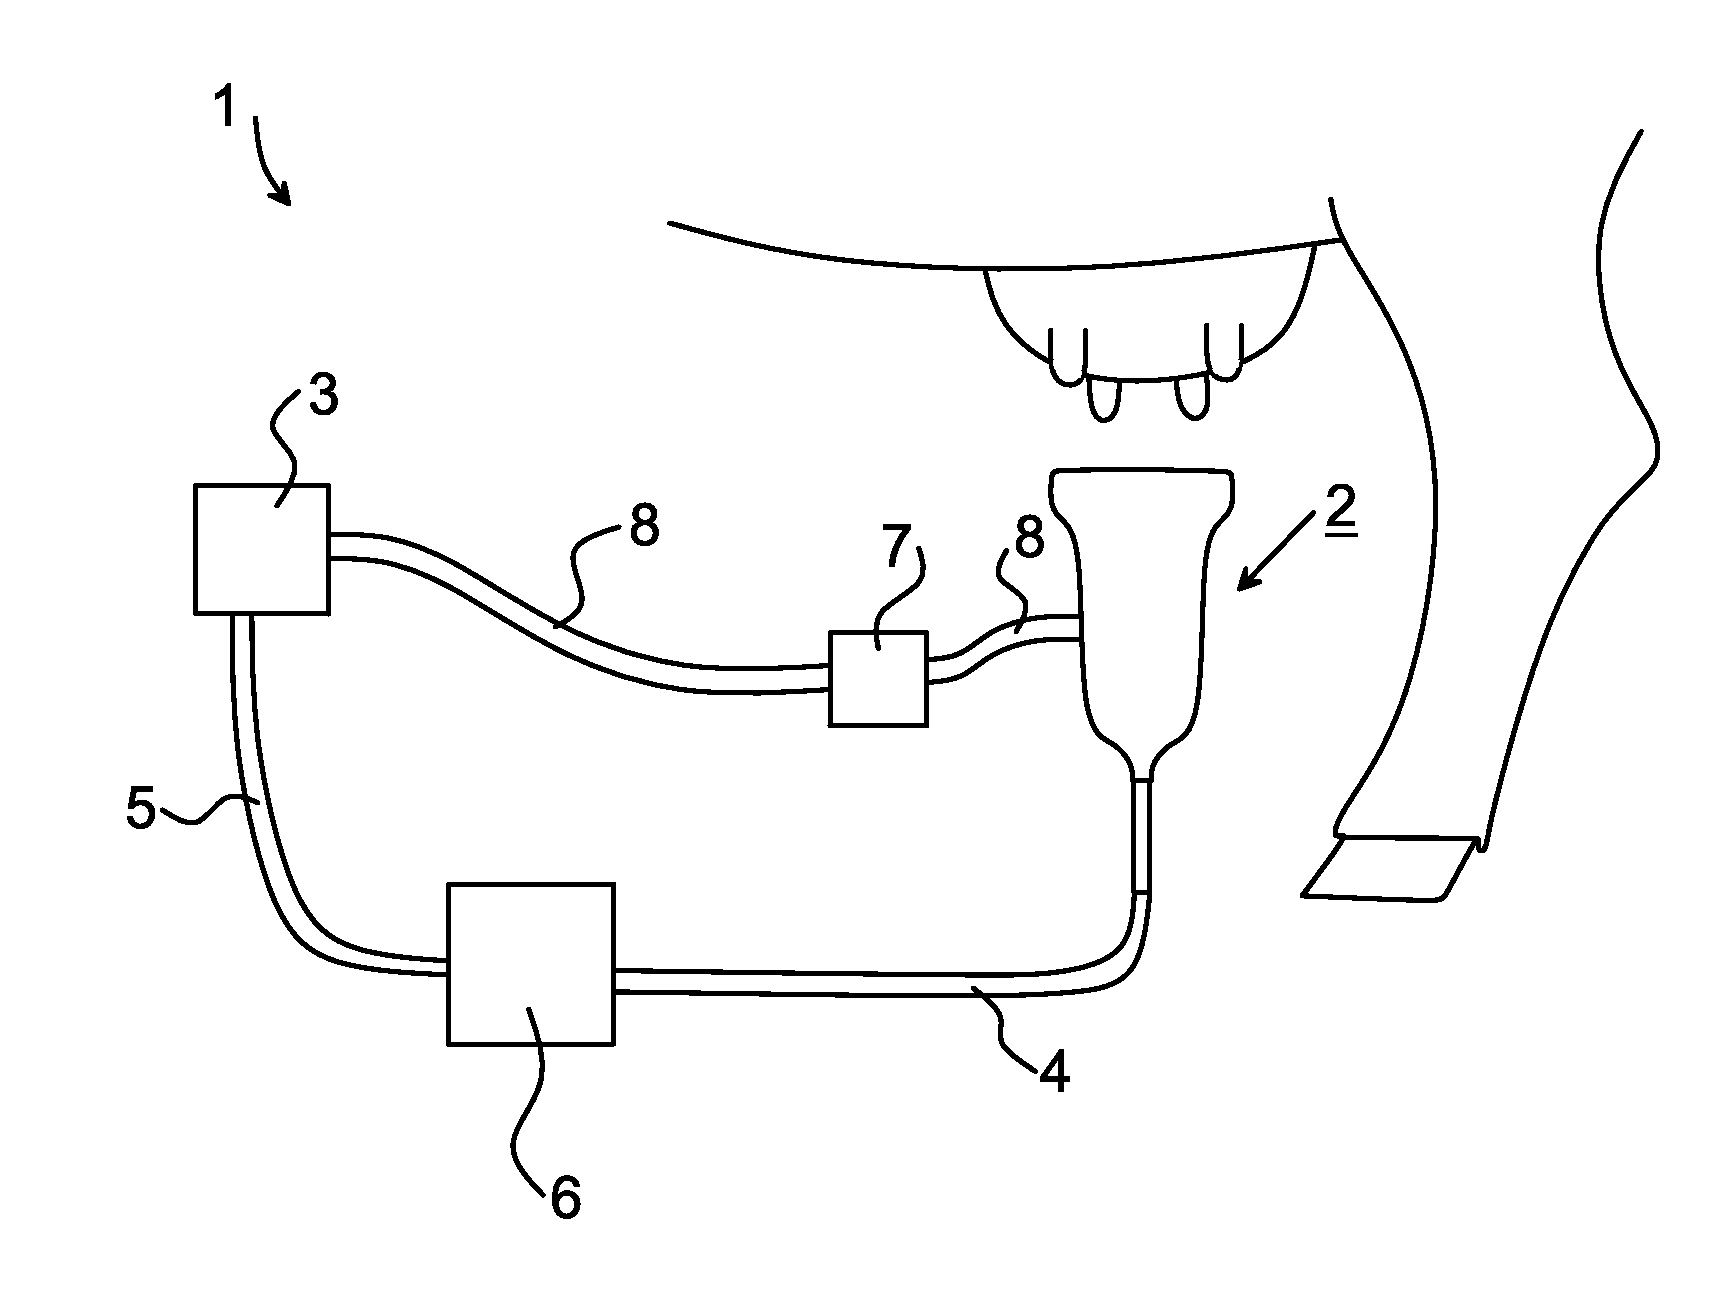 Milking system, a teat cup and a teat cup liner